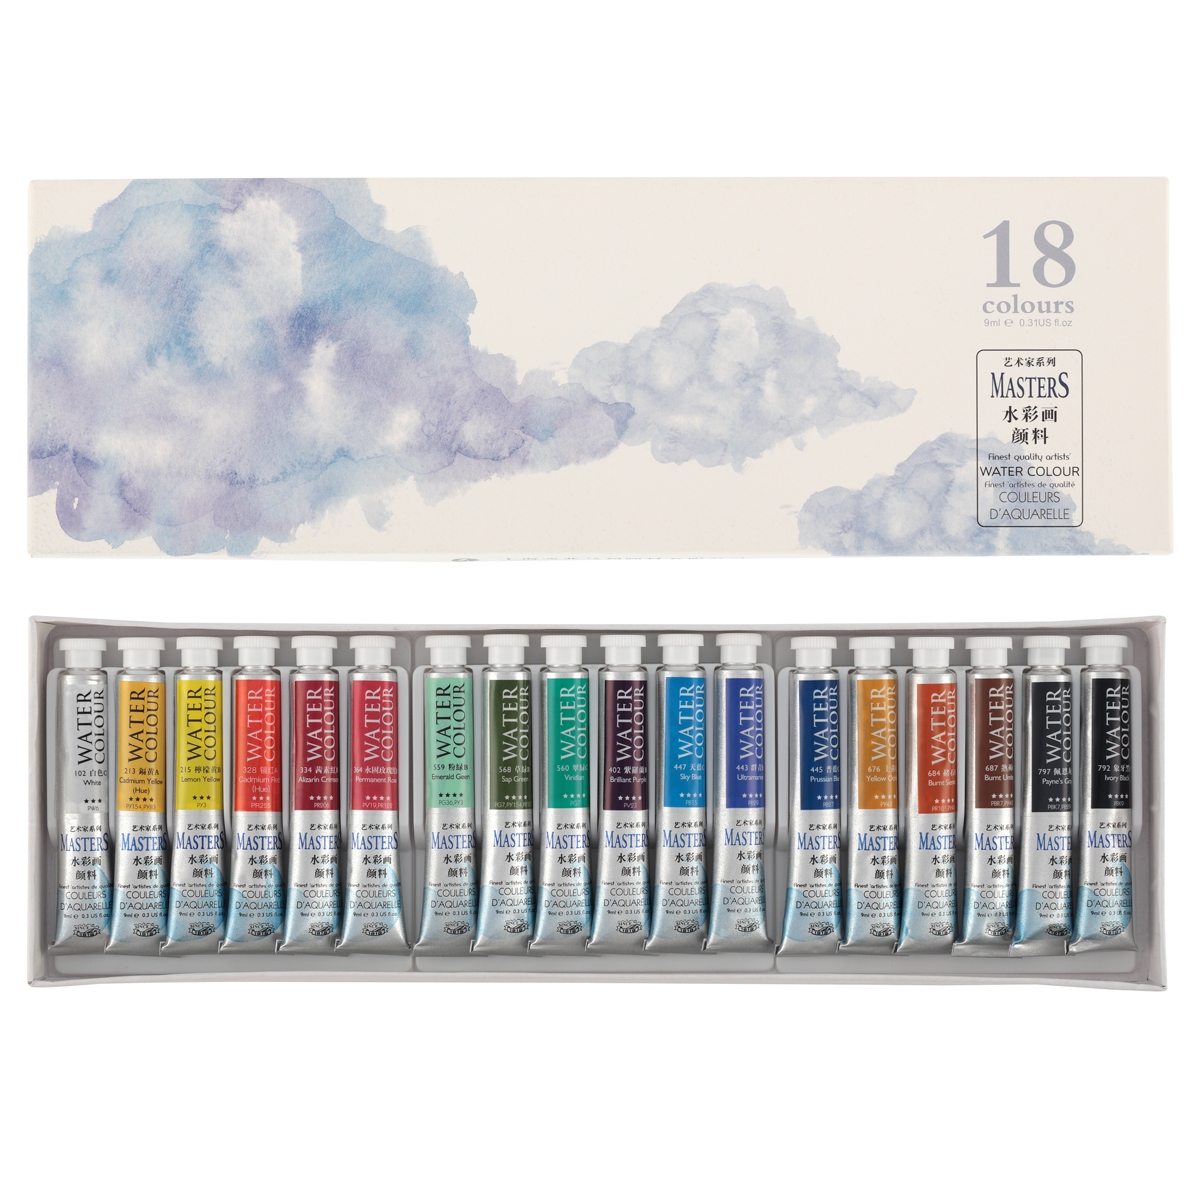 Marie's Master Quality Watercolor Set of 18 9ml Tubes